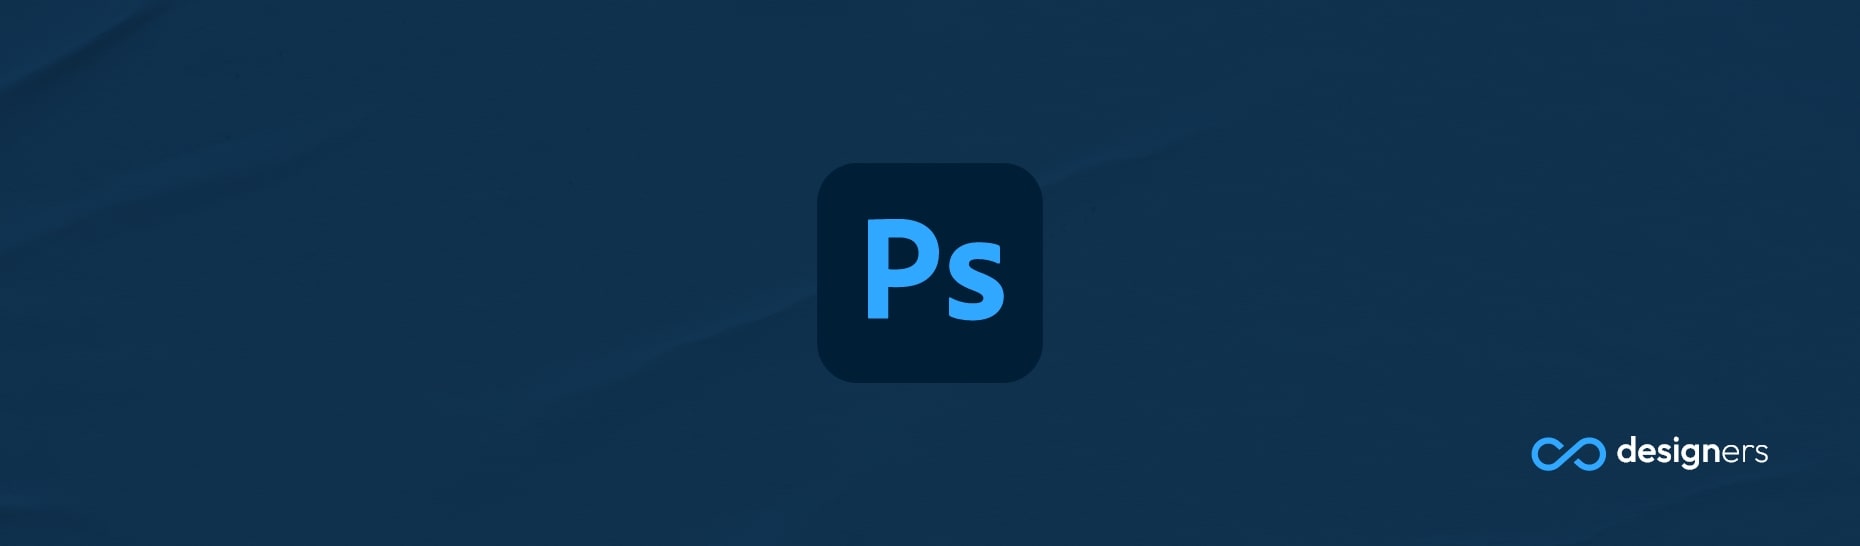 Can I Purchase Photoshop Without Subscription?